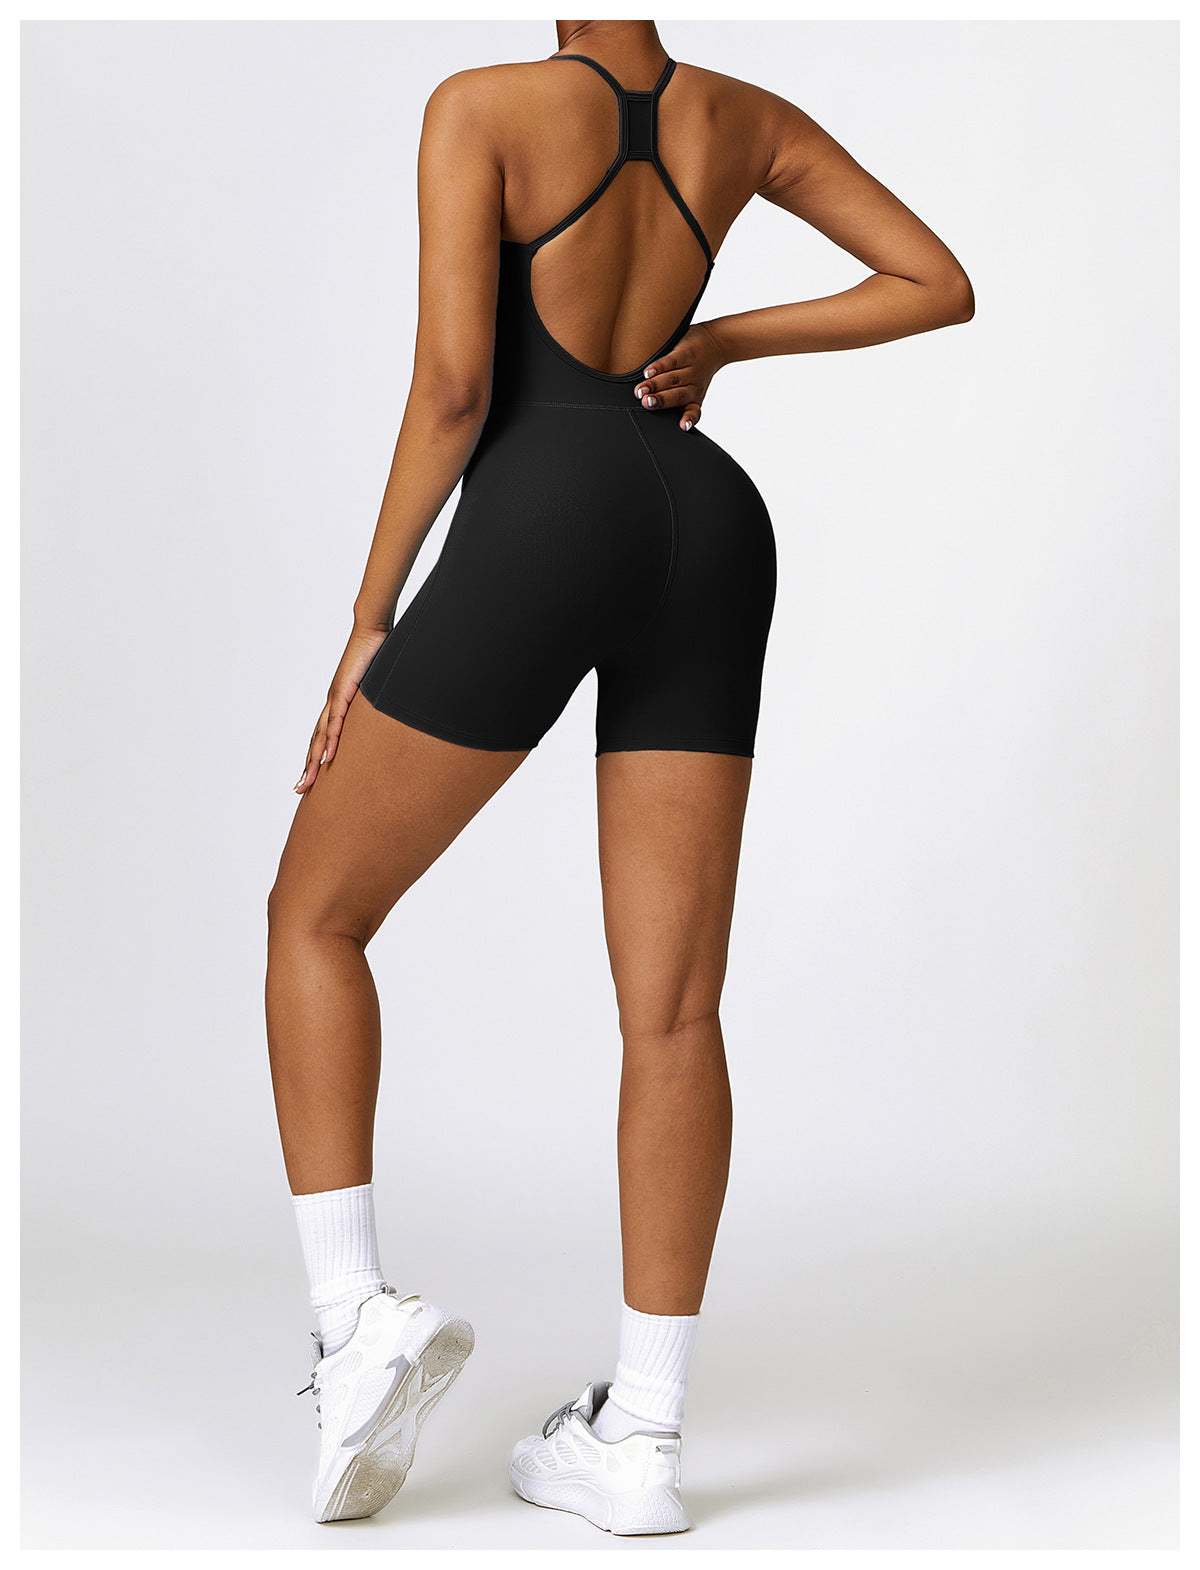 2023.09 Yoga clothing women's dance fitness one-piece hip lifting exercise yoga jumpsuit 8392